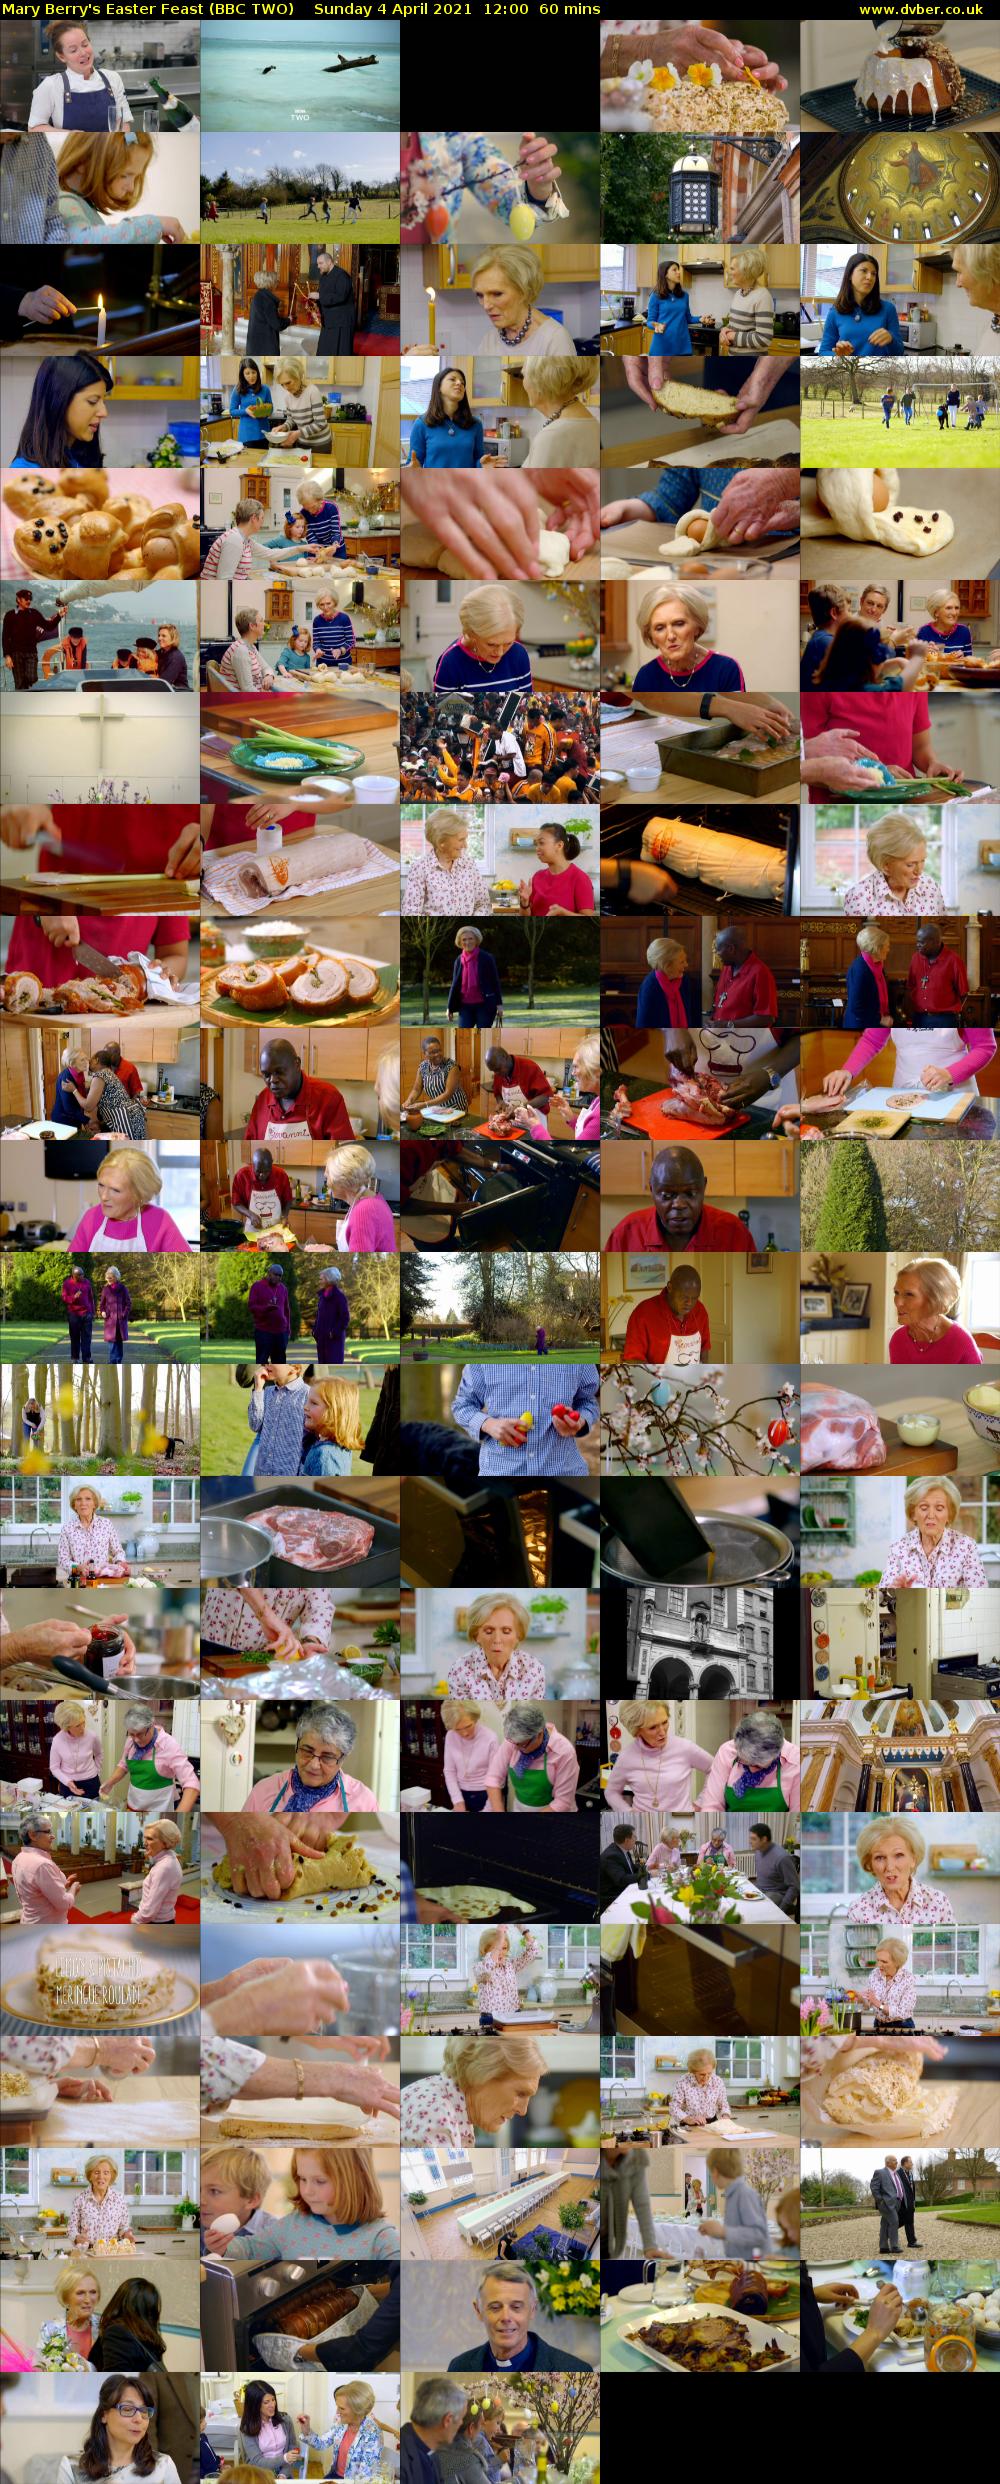 Mary Berry's Easter Feast (BBC TWO) Sunday 4 April 2021 12:00 - 13:00